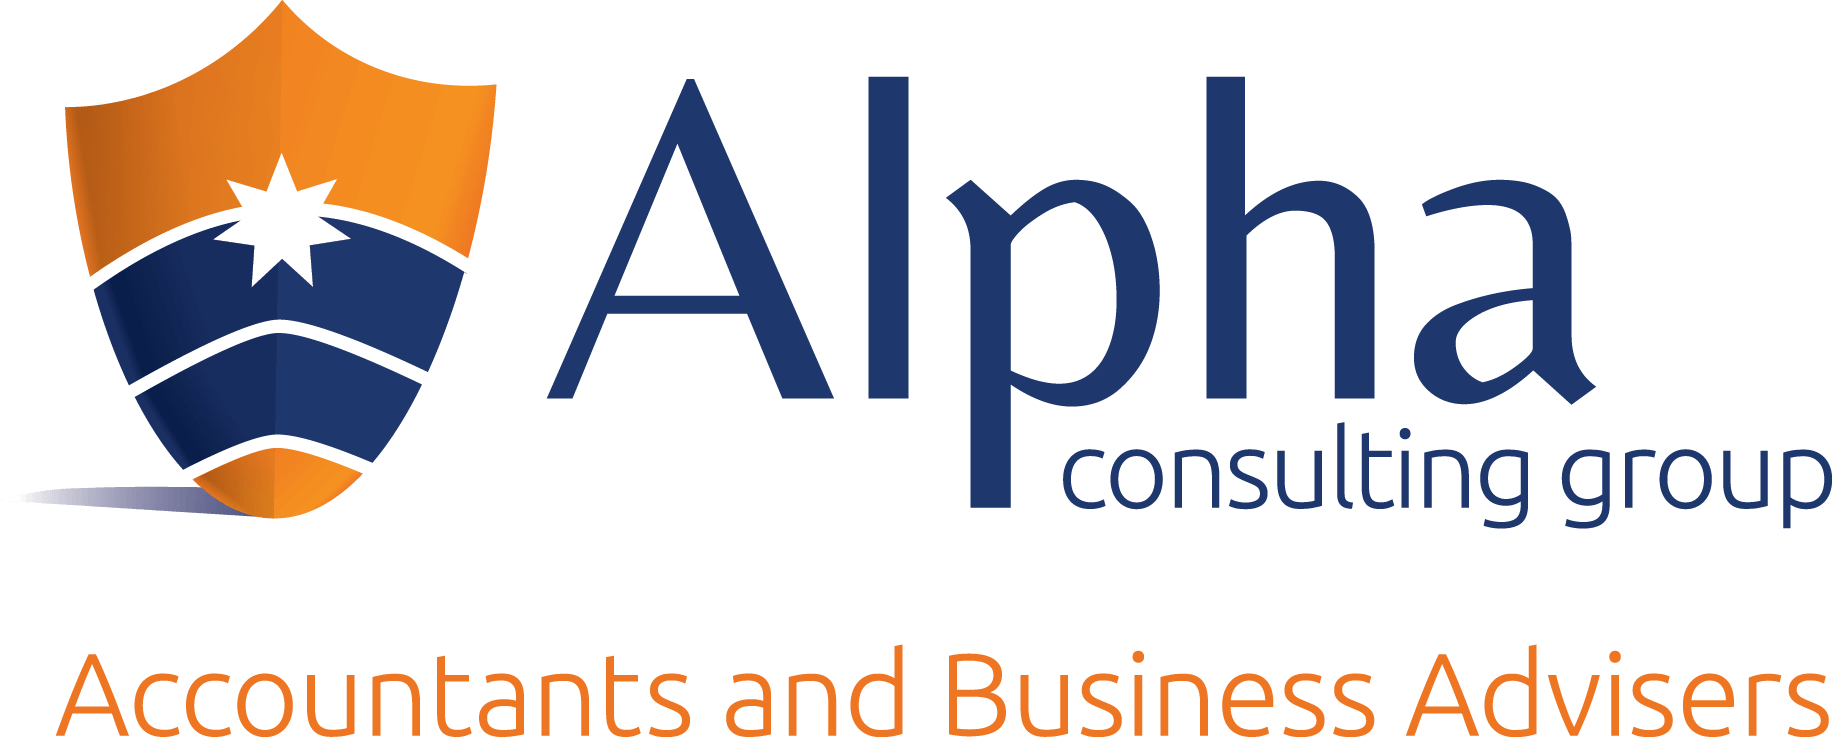 Alpha Consulting Group Accountants and Business Advisers logo.